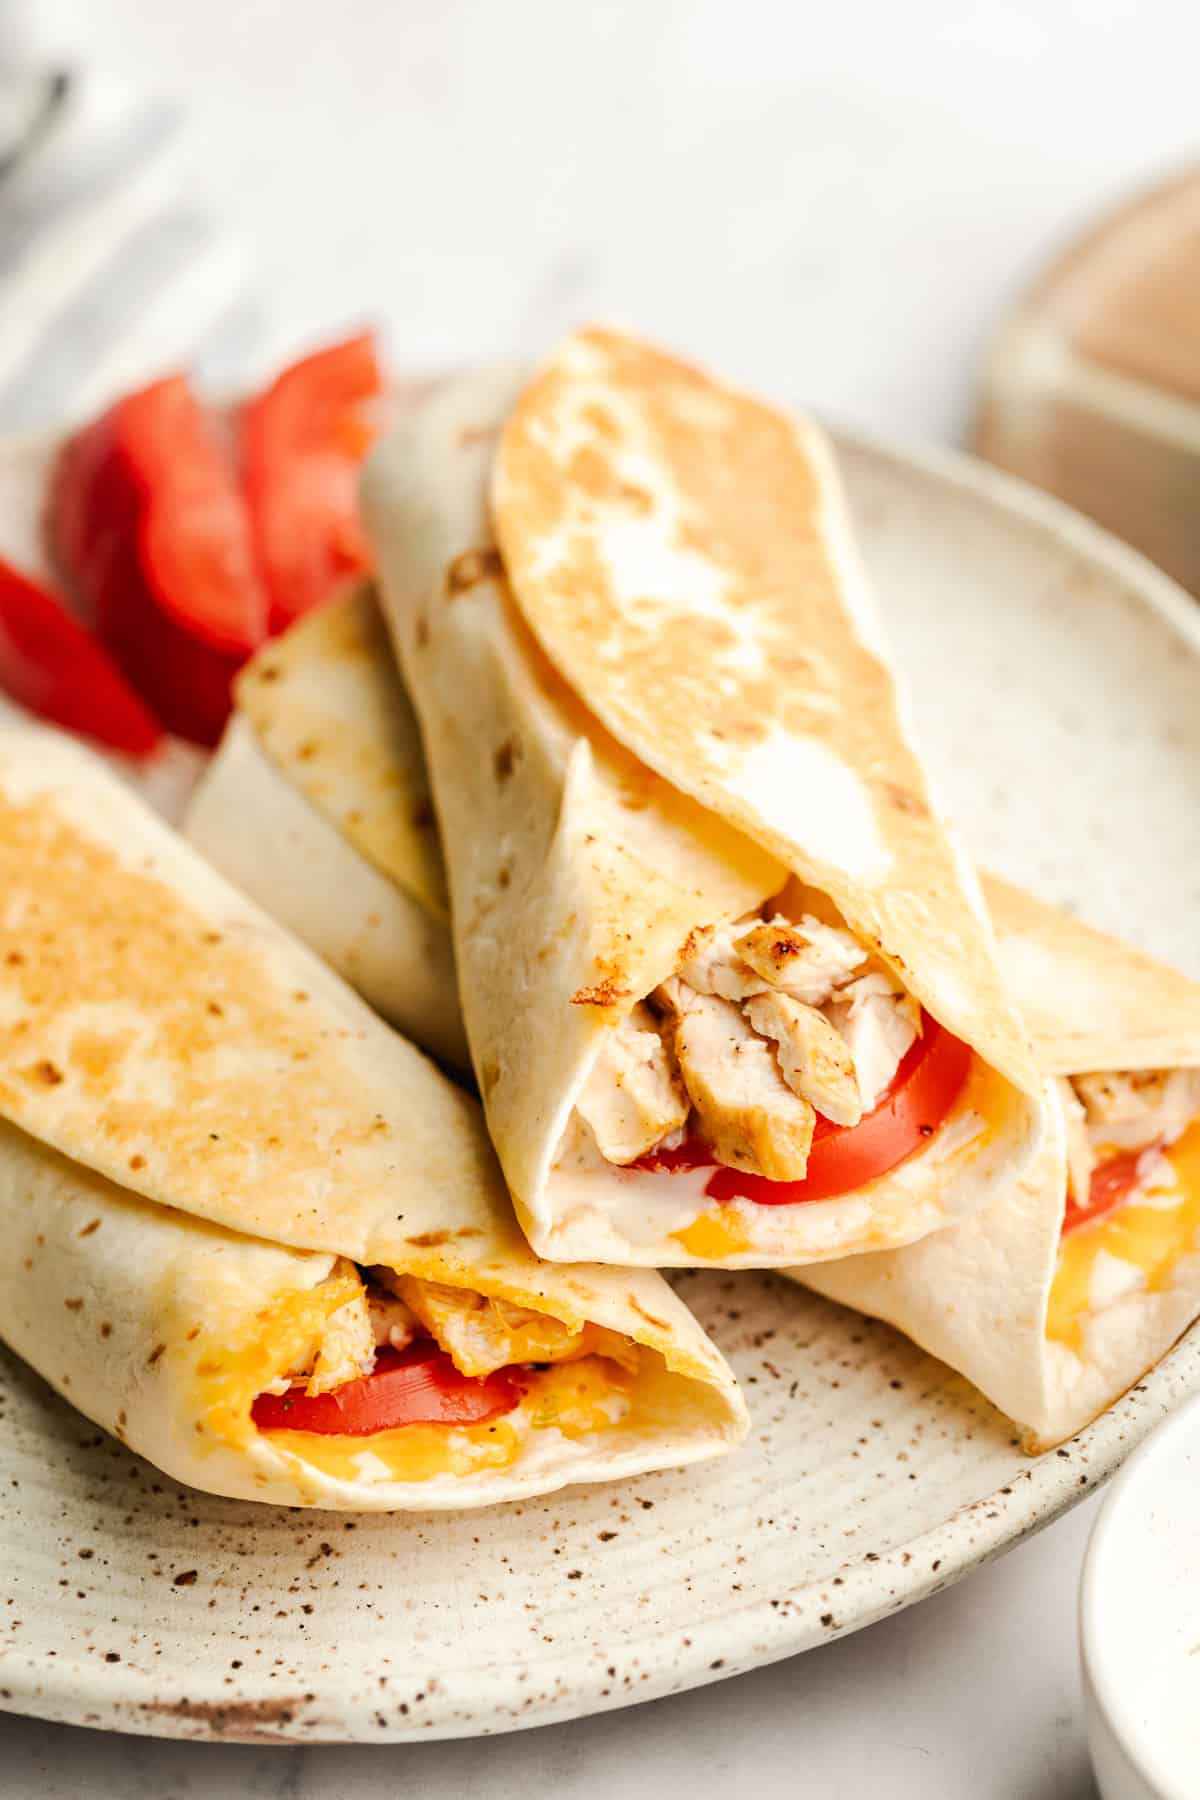 https://thewholecook.com/wp-content/uploads/2022/08/Grilled-Ranch-Chicken-Wraps-1-3.jpg